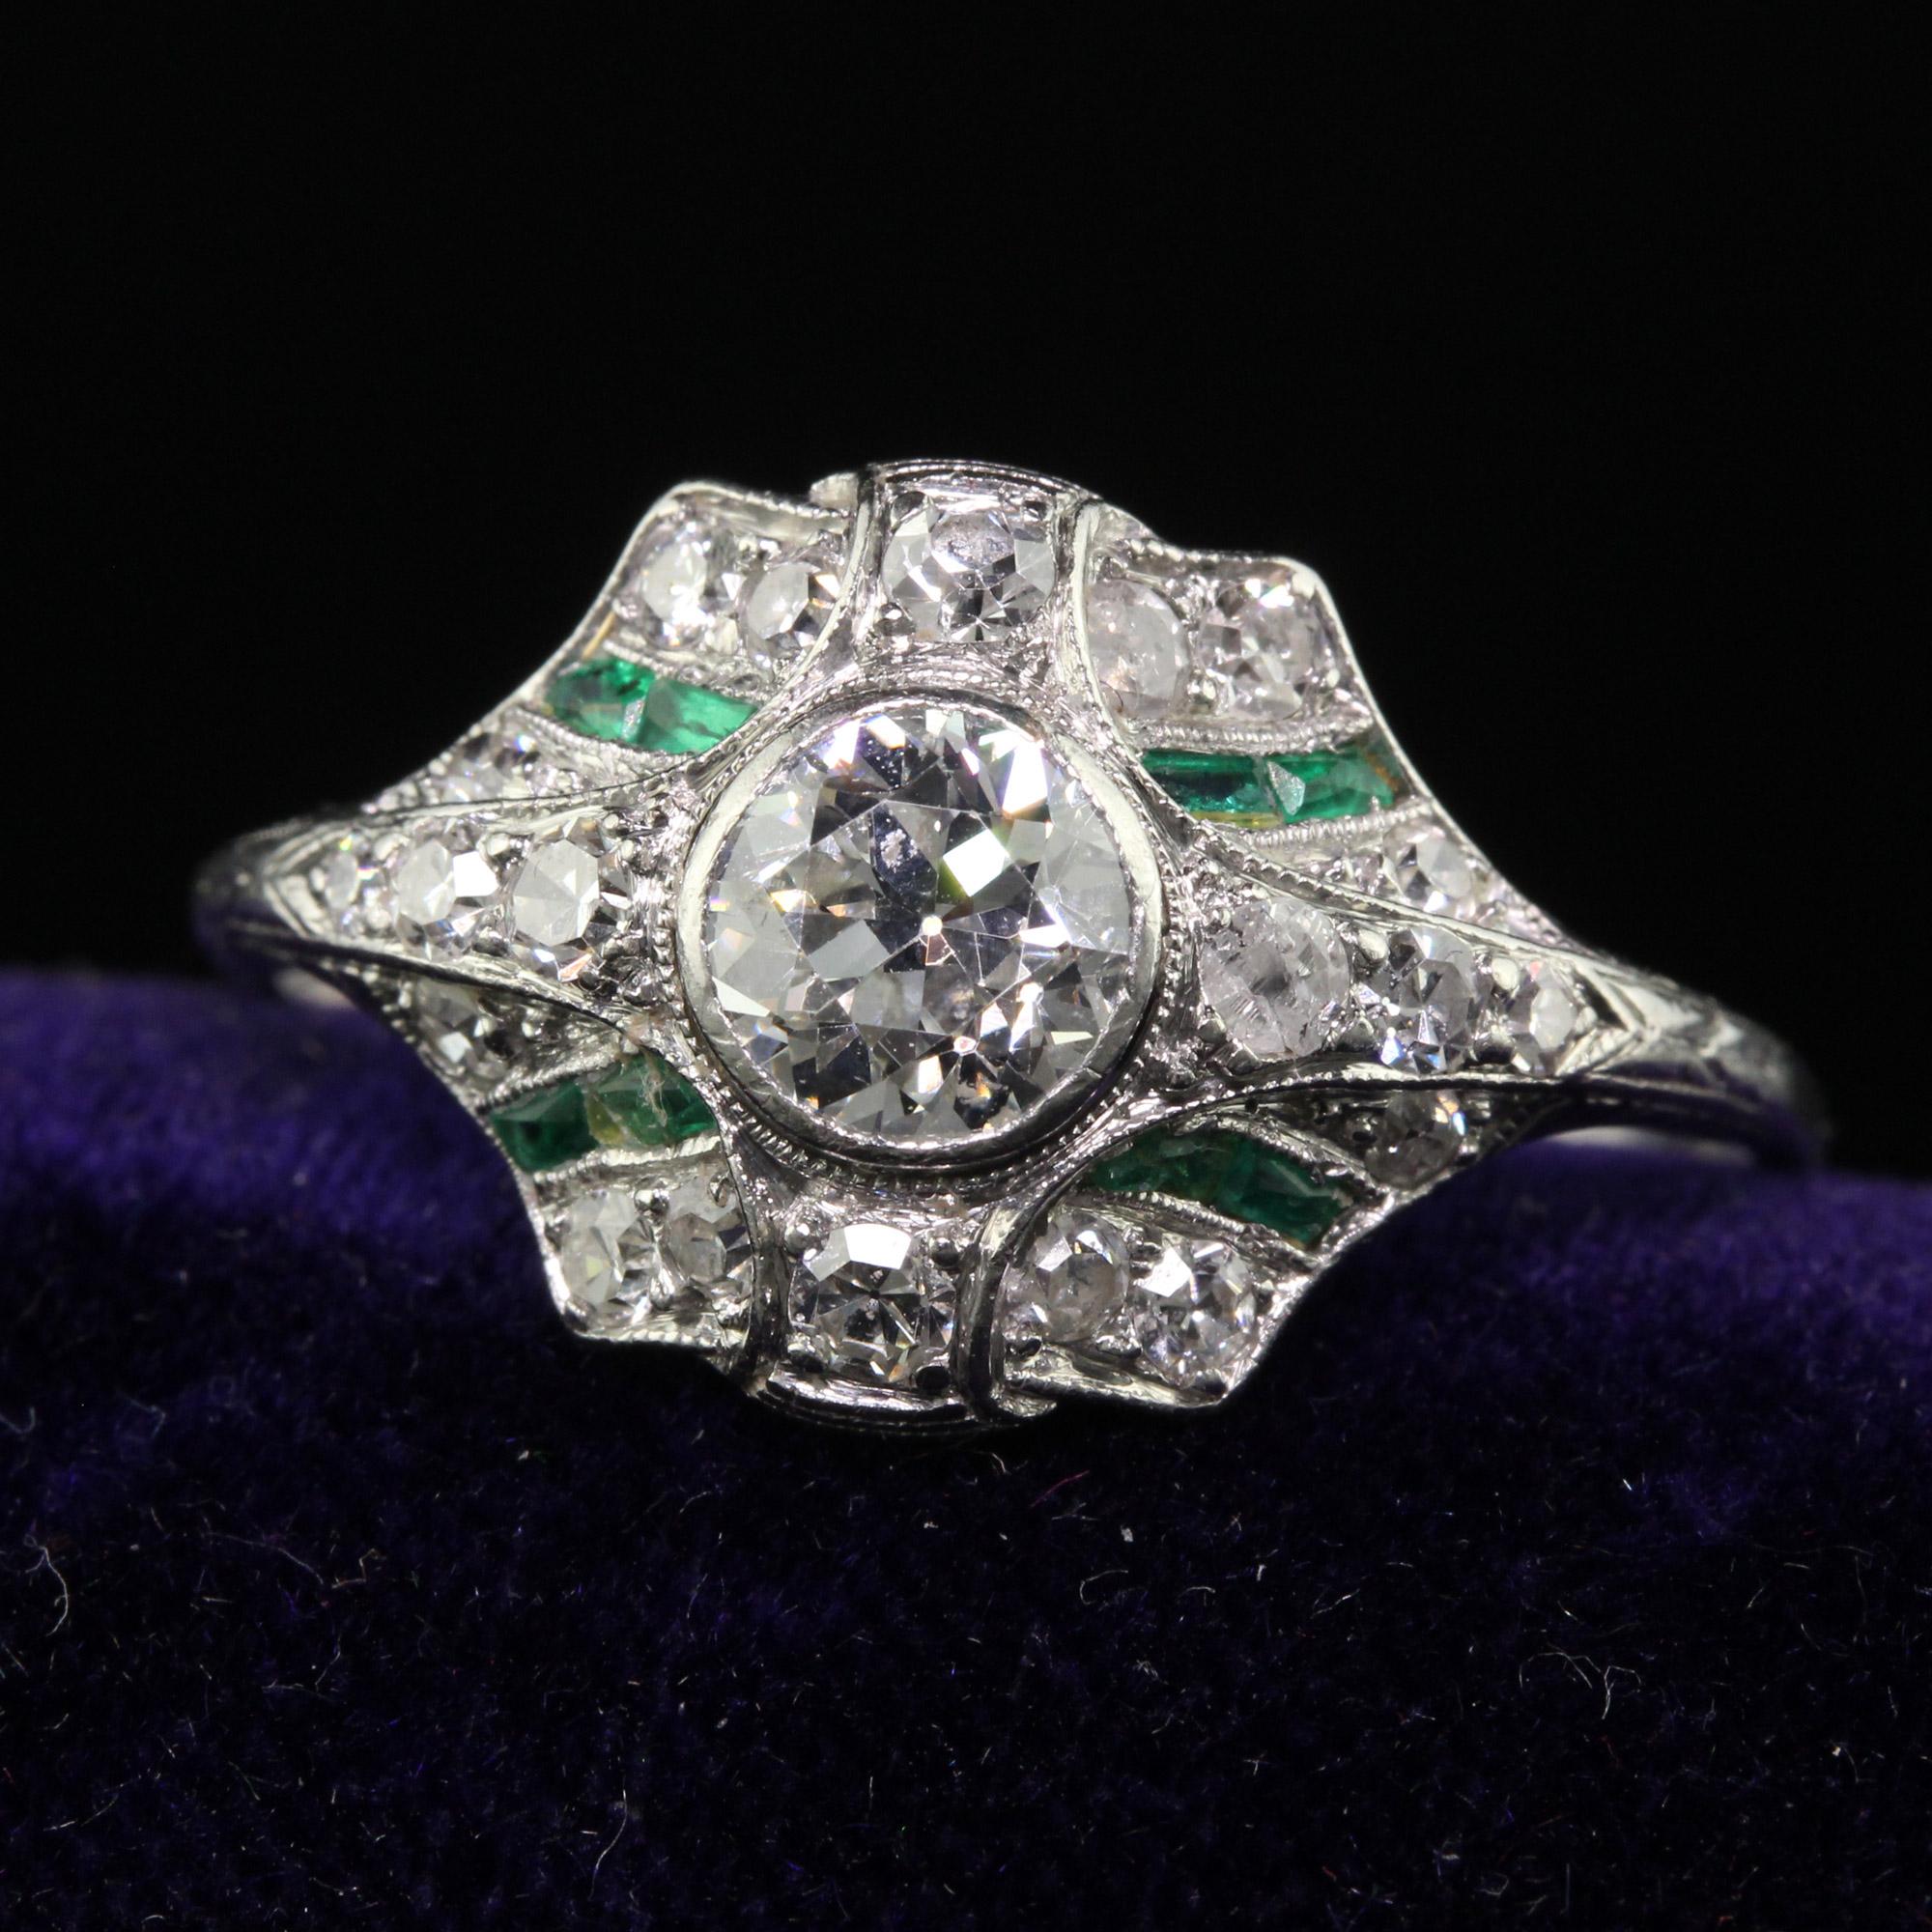 Beautiful Antique Art Deco Platinum Old European Diamond and Emerald Engagement Ring. This incredible engagement ring is crafted in platinum. The center holds a beautiful old European cut diamond that has smaller old European cut diamonds and French